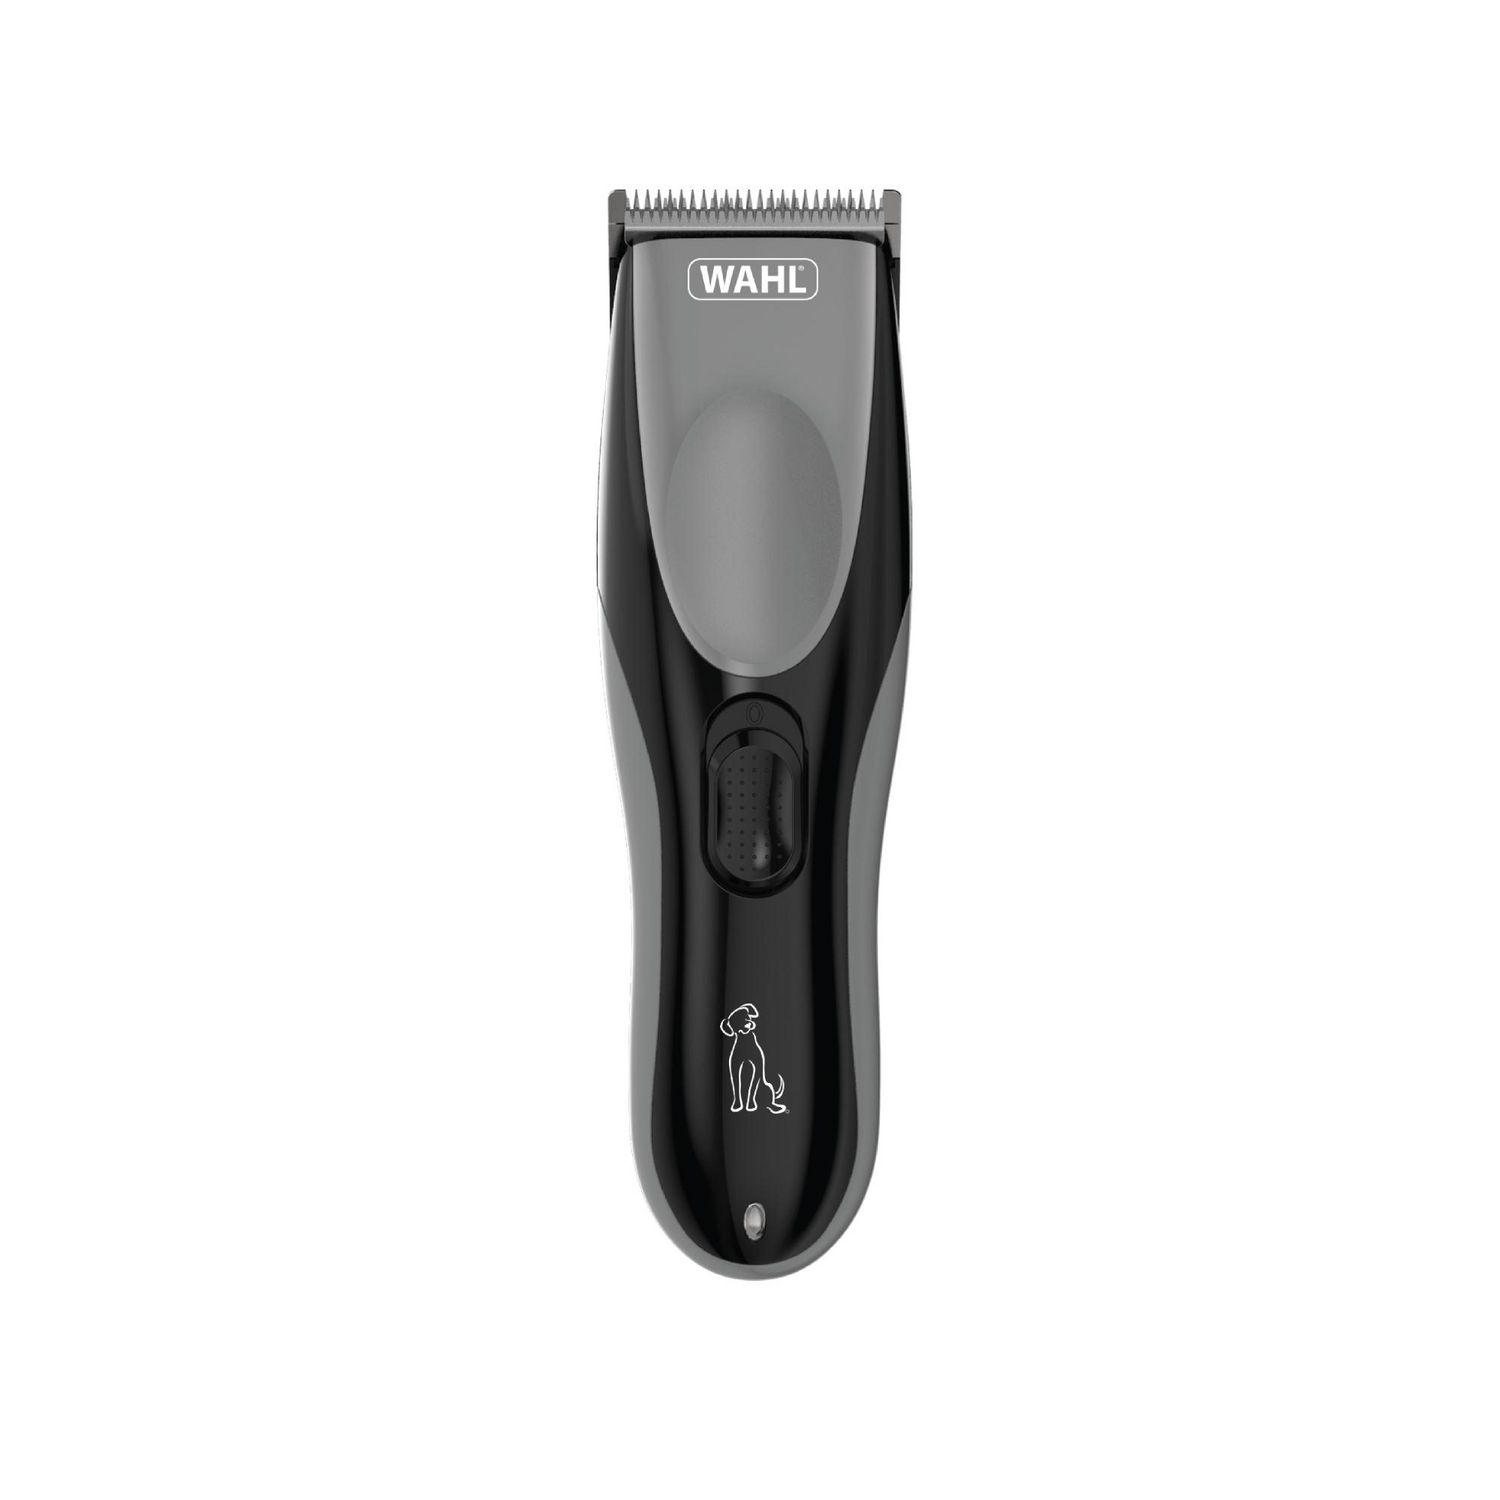 Wahl Easy Pro Dog Clipper Kit, Cord/cordless for total freedom of